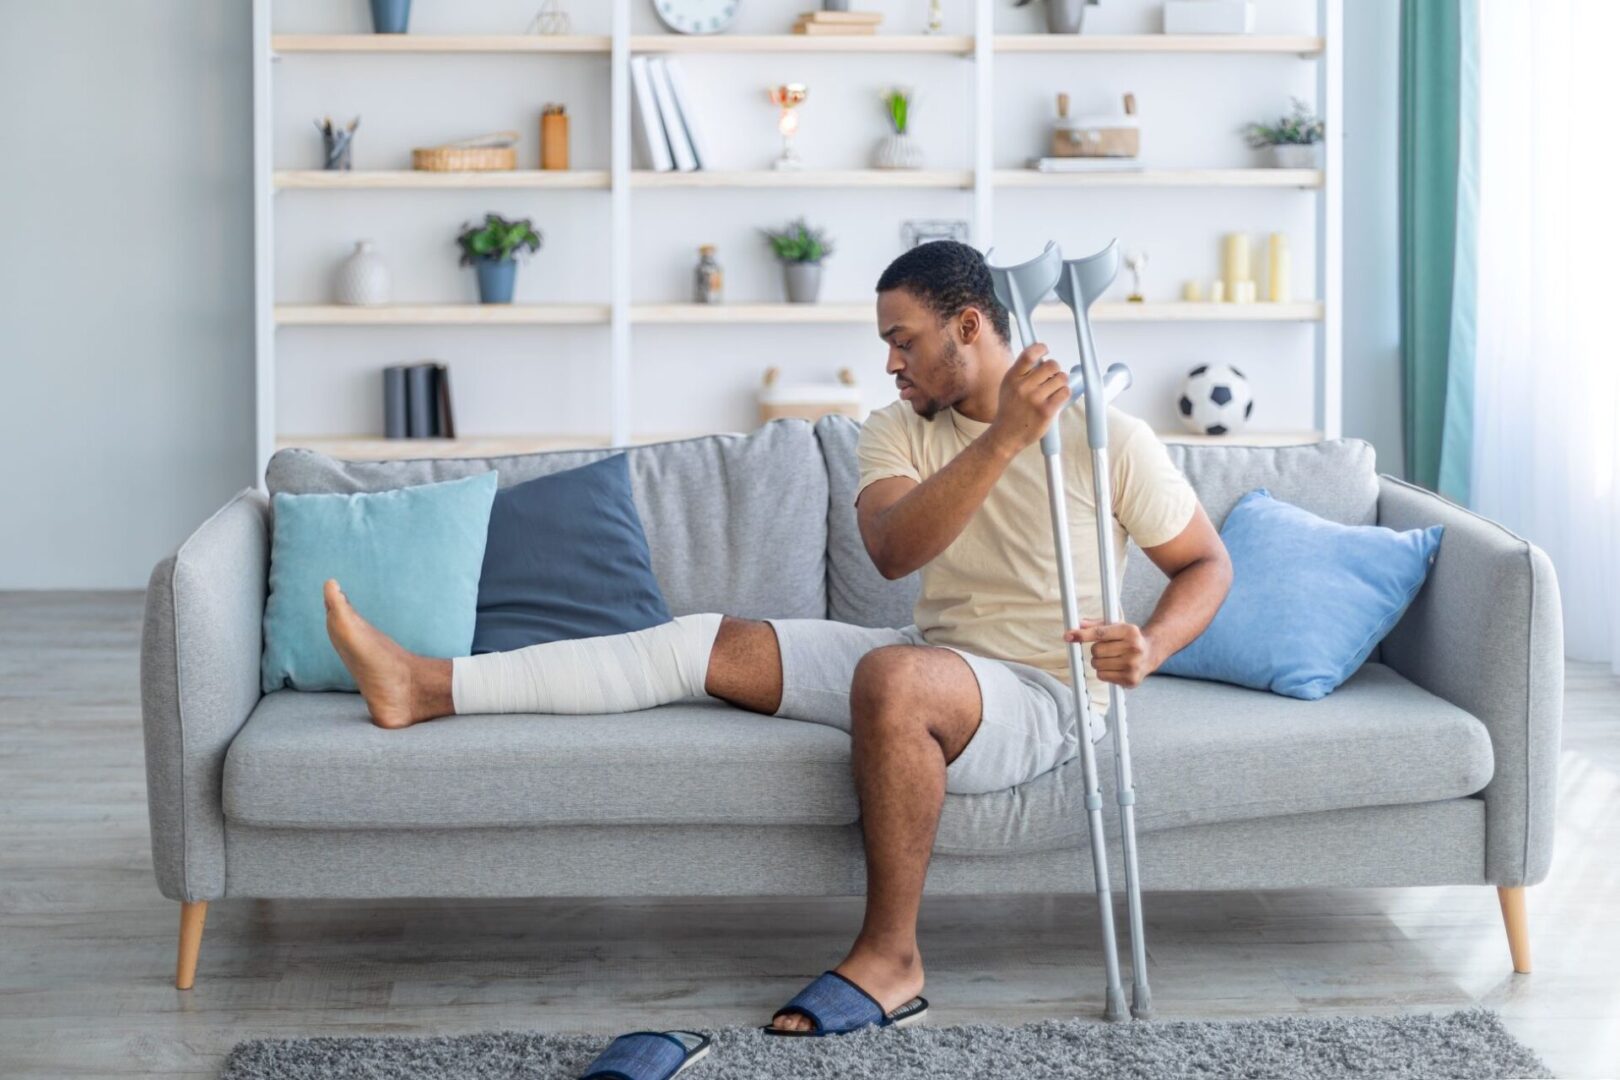 A man with his leg in plaster on the couch